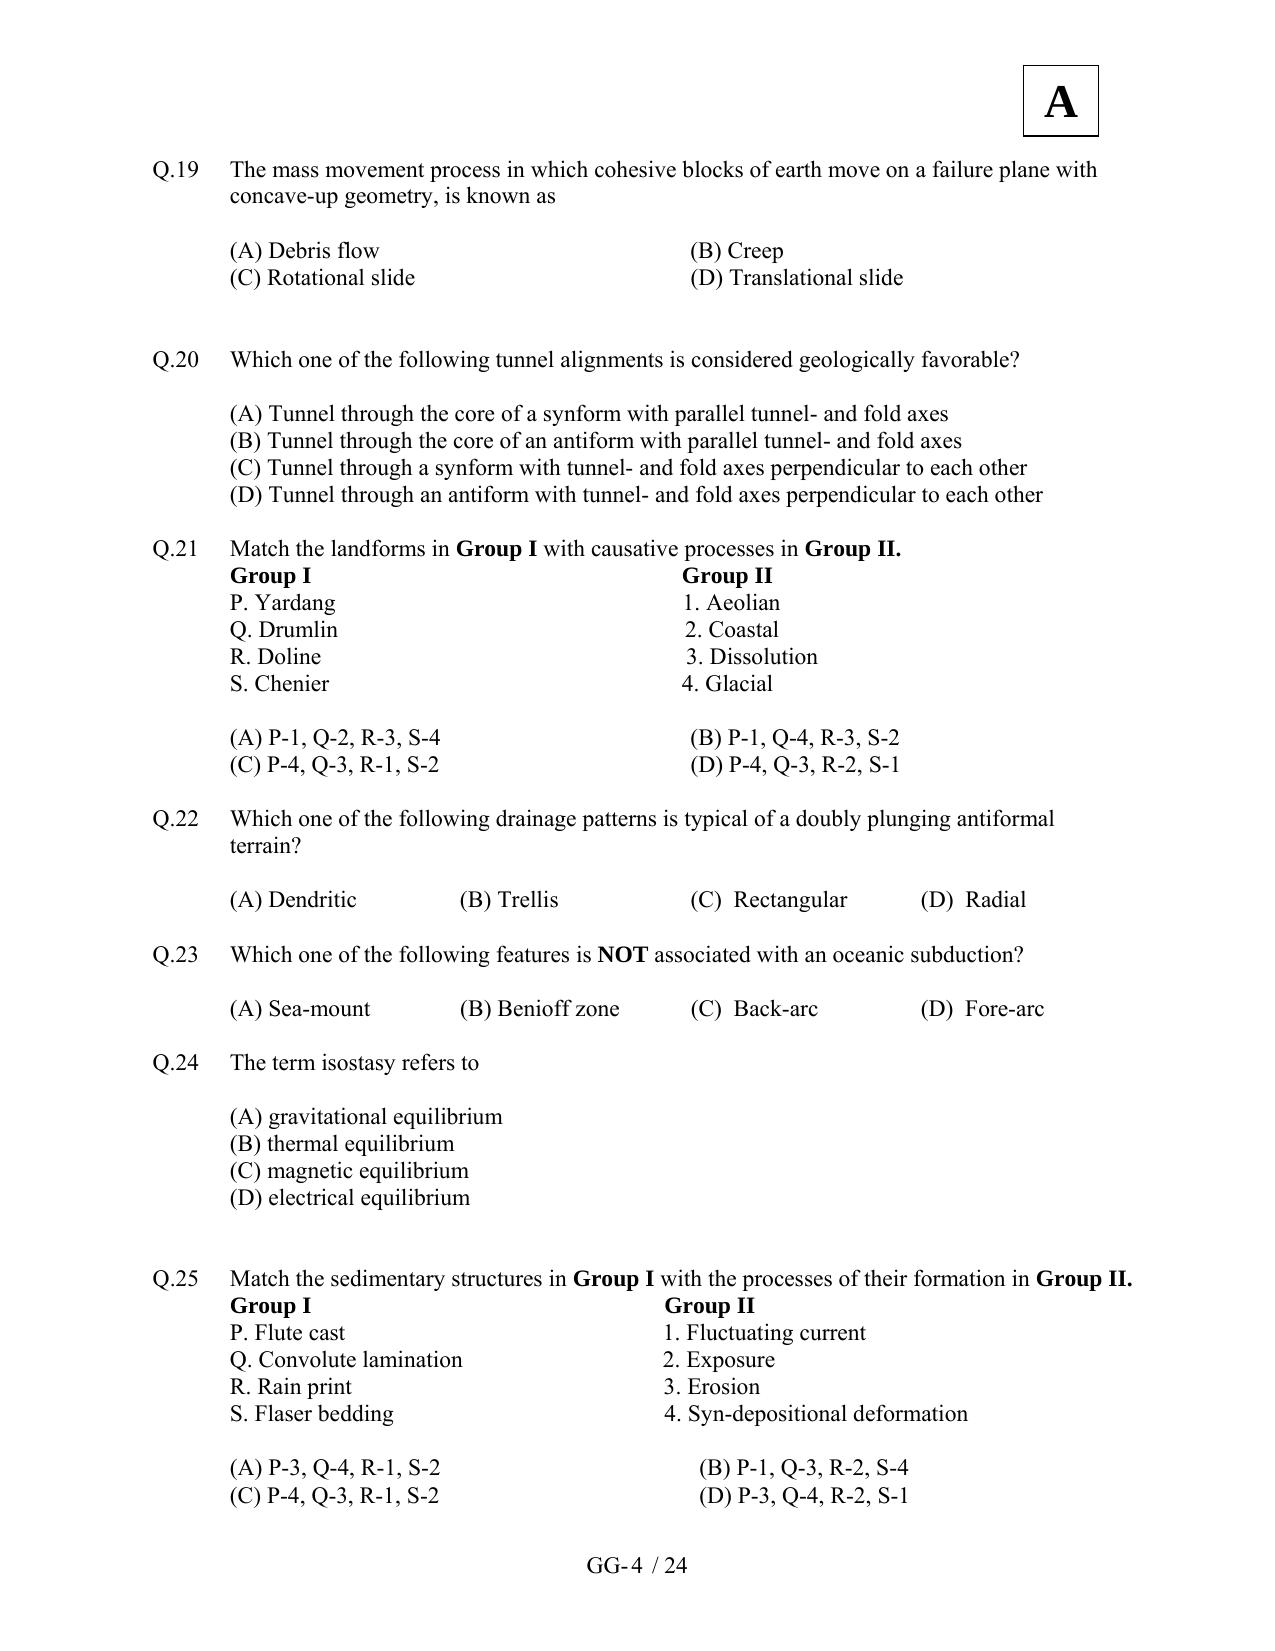 JAM 2012: GG Question Paper - Page 6